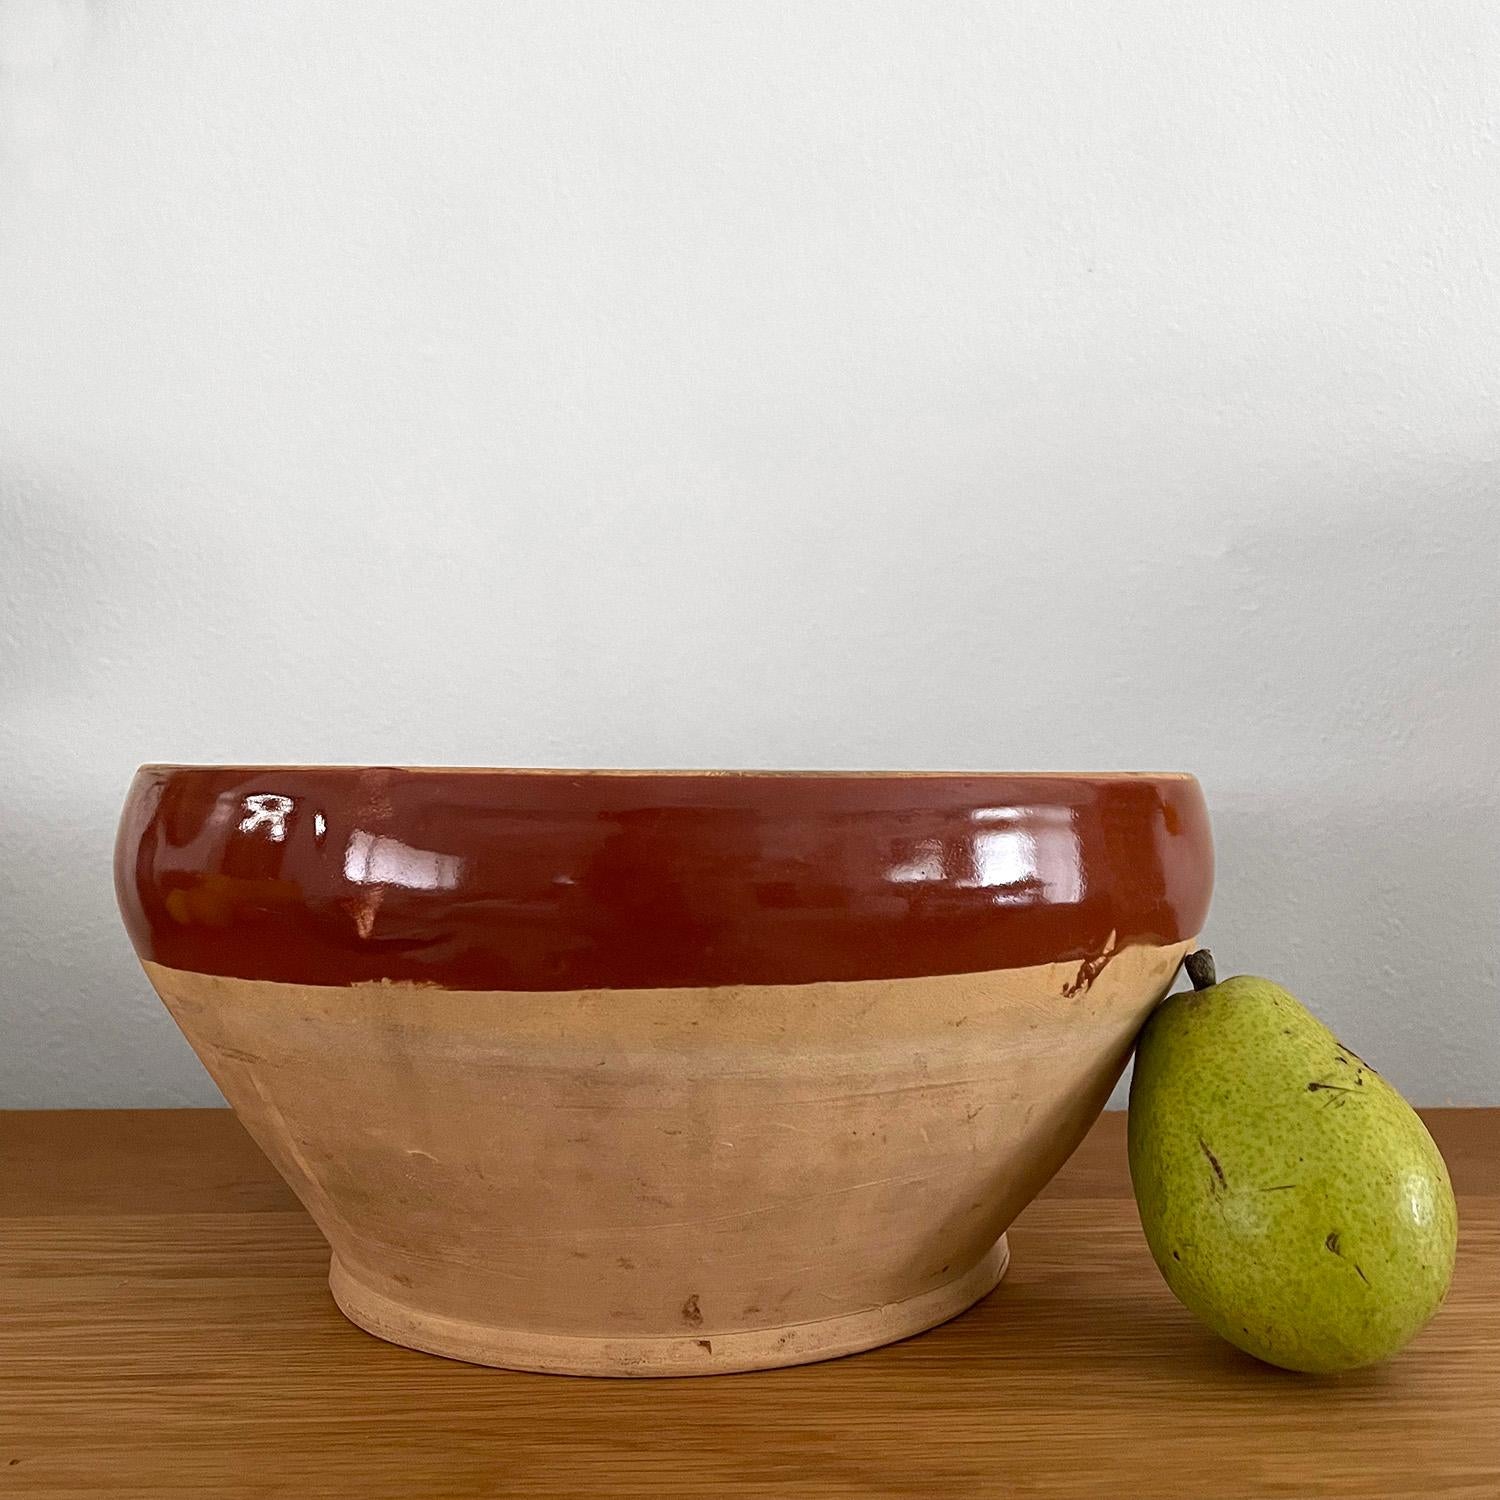 French earthenware bowl
Organic texture and feel
Neutral toned ceramic bowl in a matte finish accented with a deep terracotta glazed band
Age related wear to the inner glazing and rim makes this piece perfectly imperfect
Patina from age and use